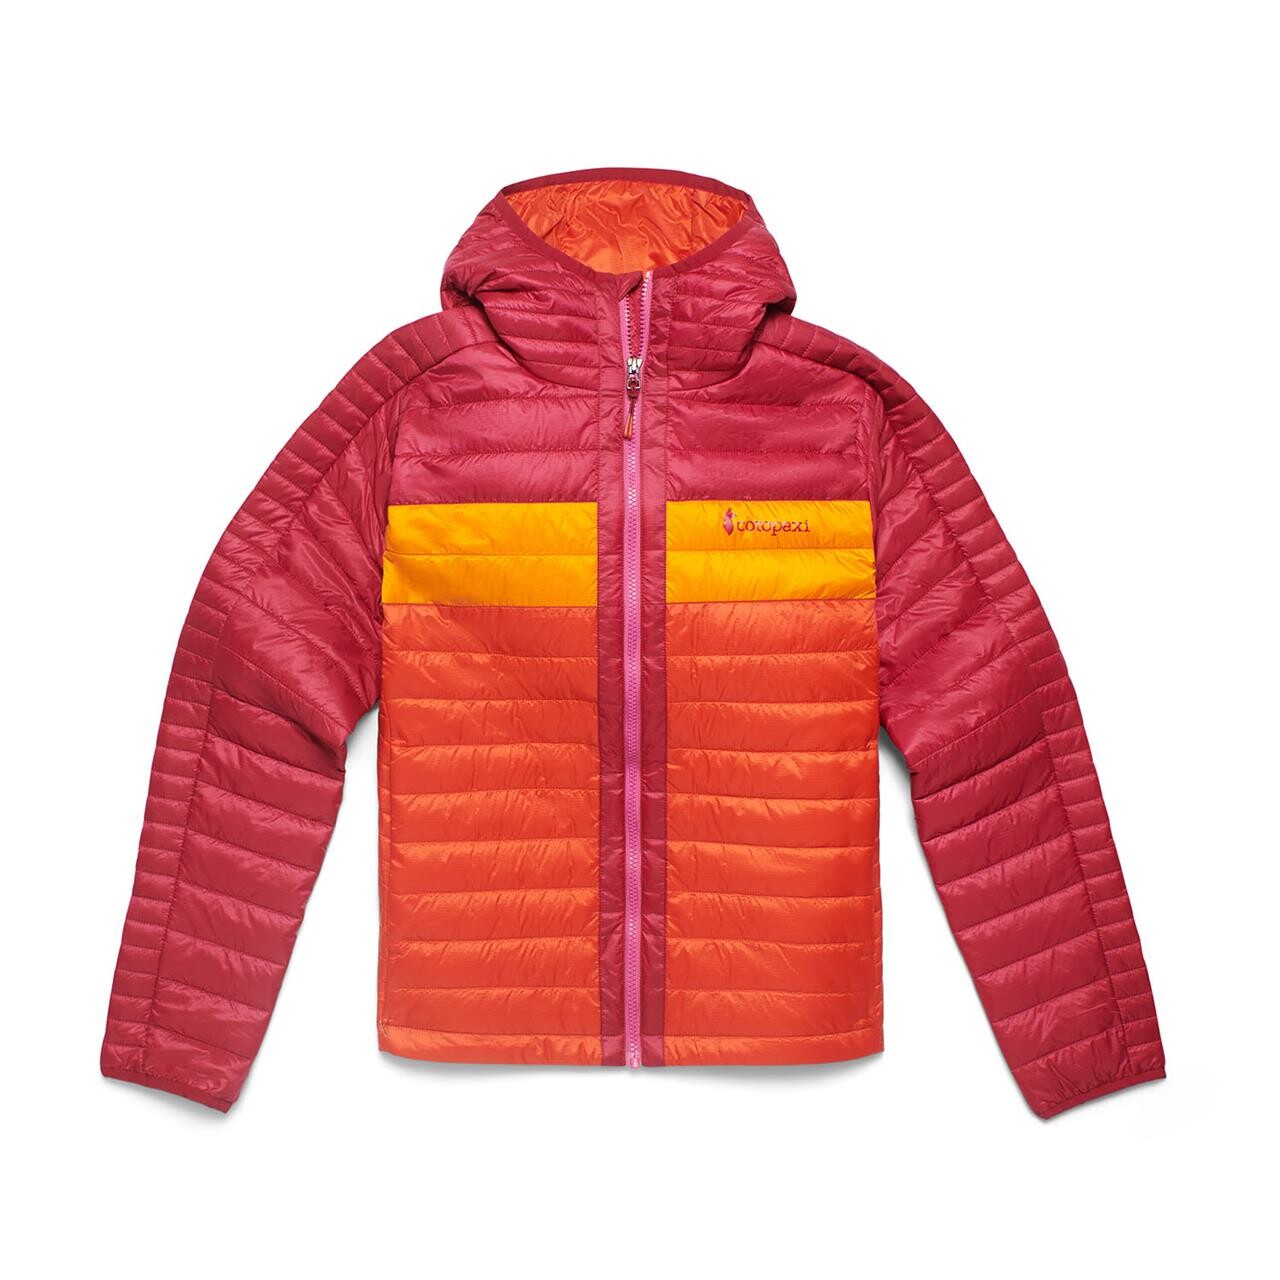 Se Cotopaxi Womens Capa Insulated Hooded Jacket (Rød (RASPBERRY & CANYON) Small) hos Friluftsland.dk